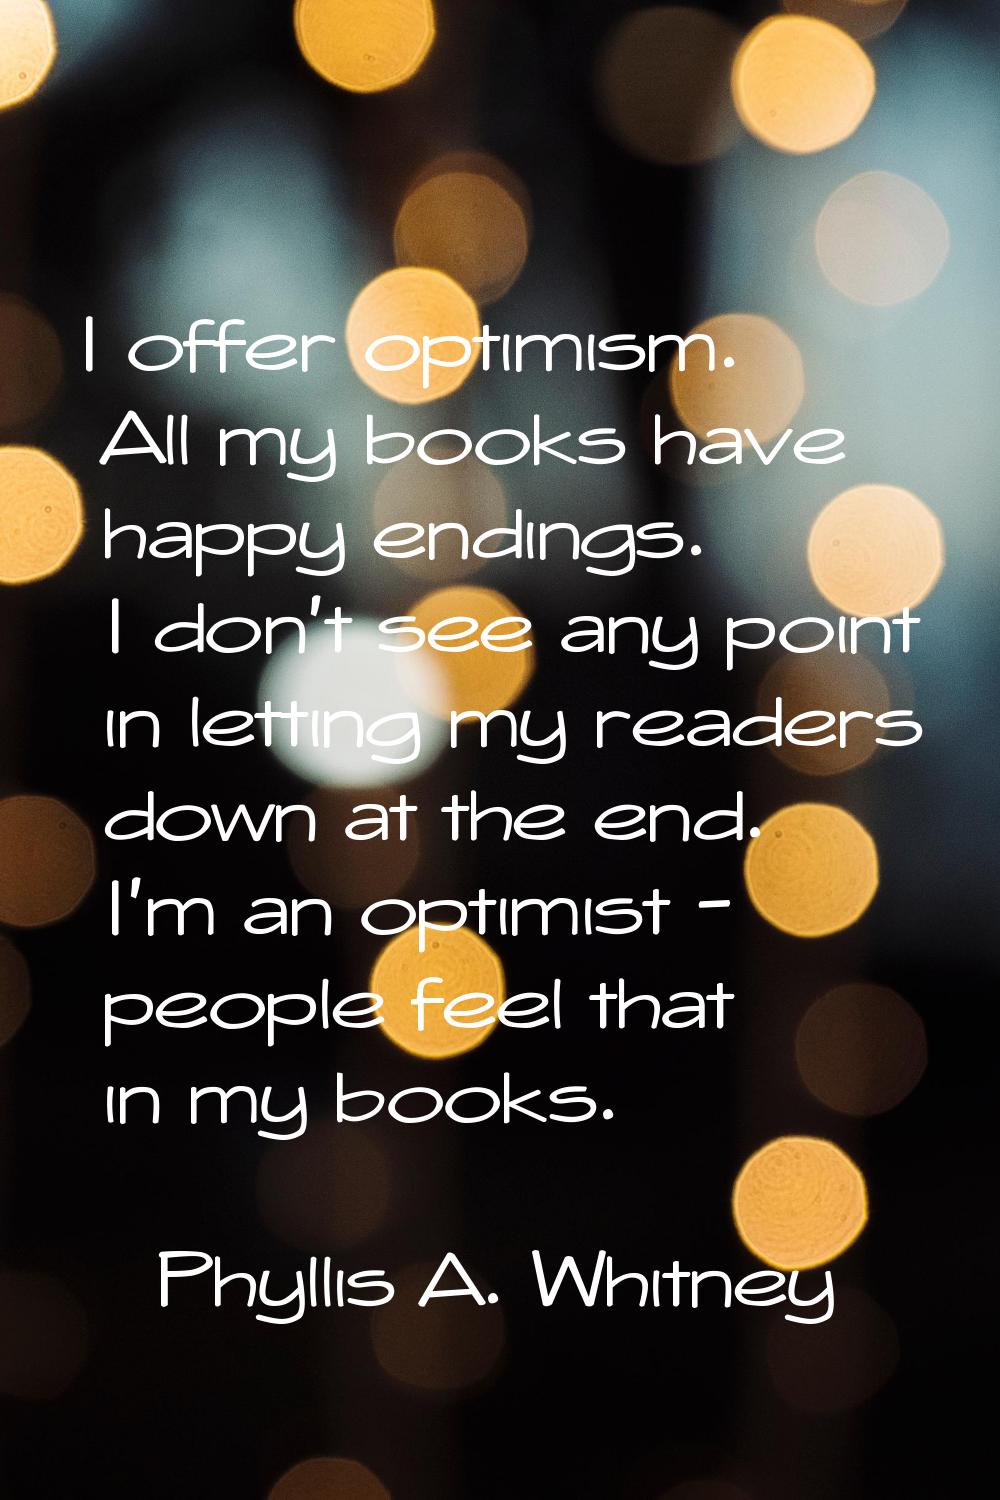 I offer optimism. All my books have happy endings. I don't see any point in letting my readers down